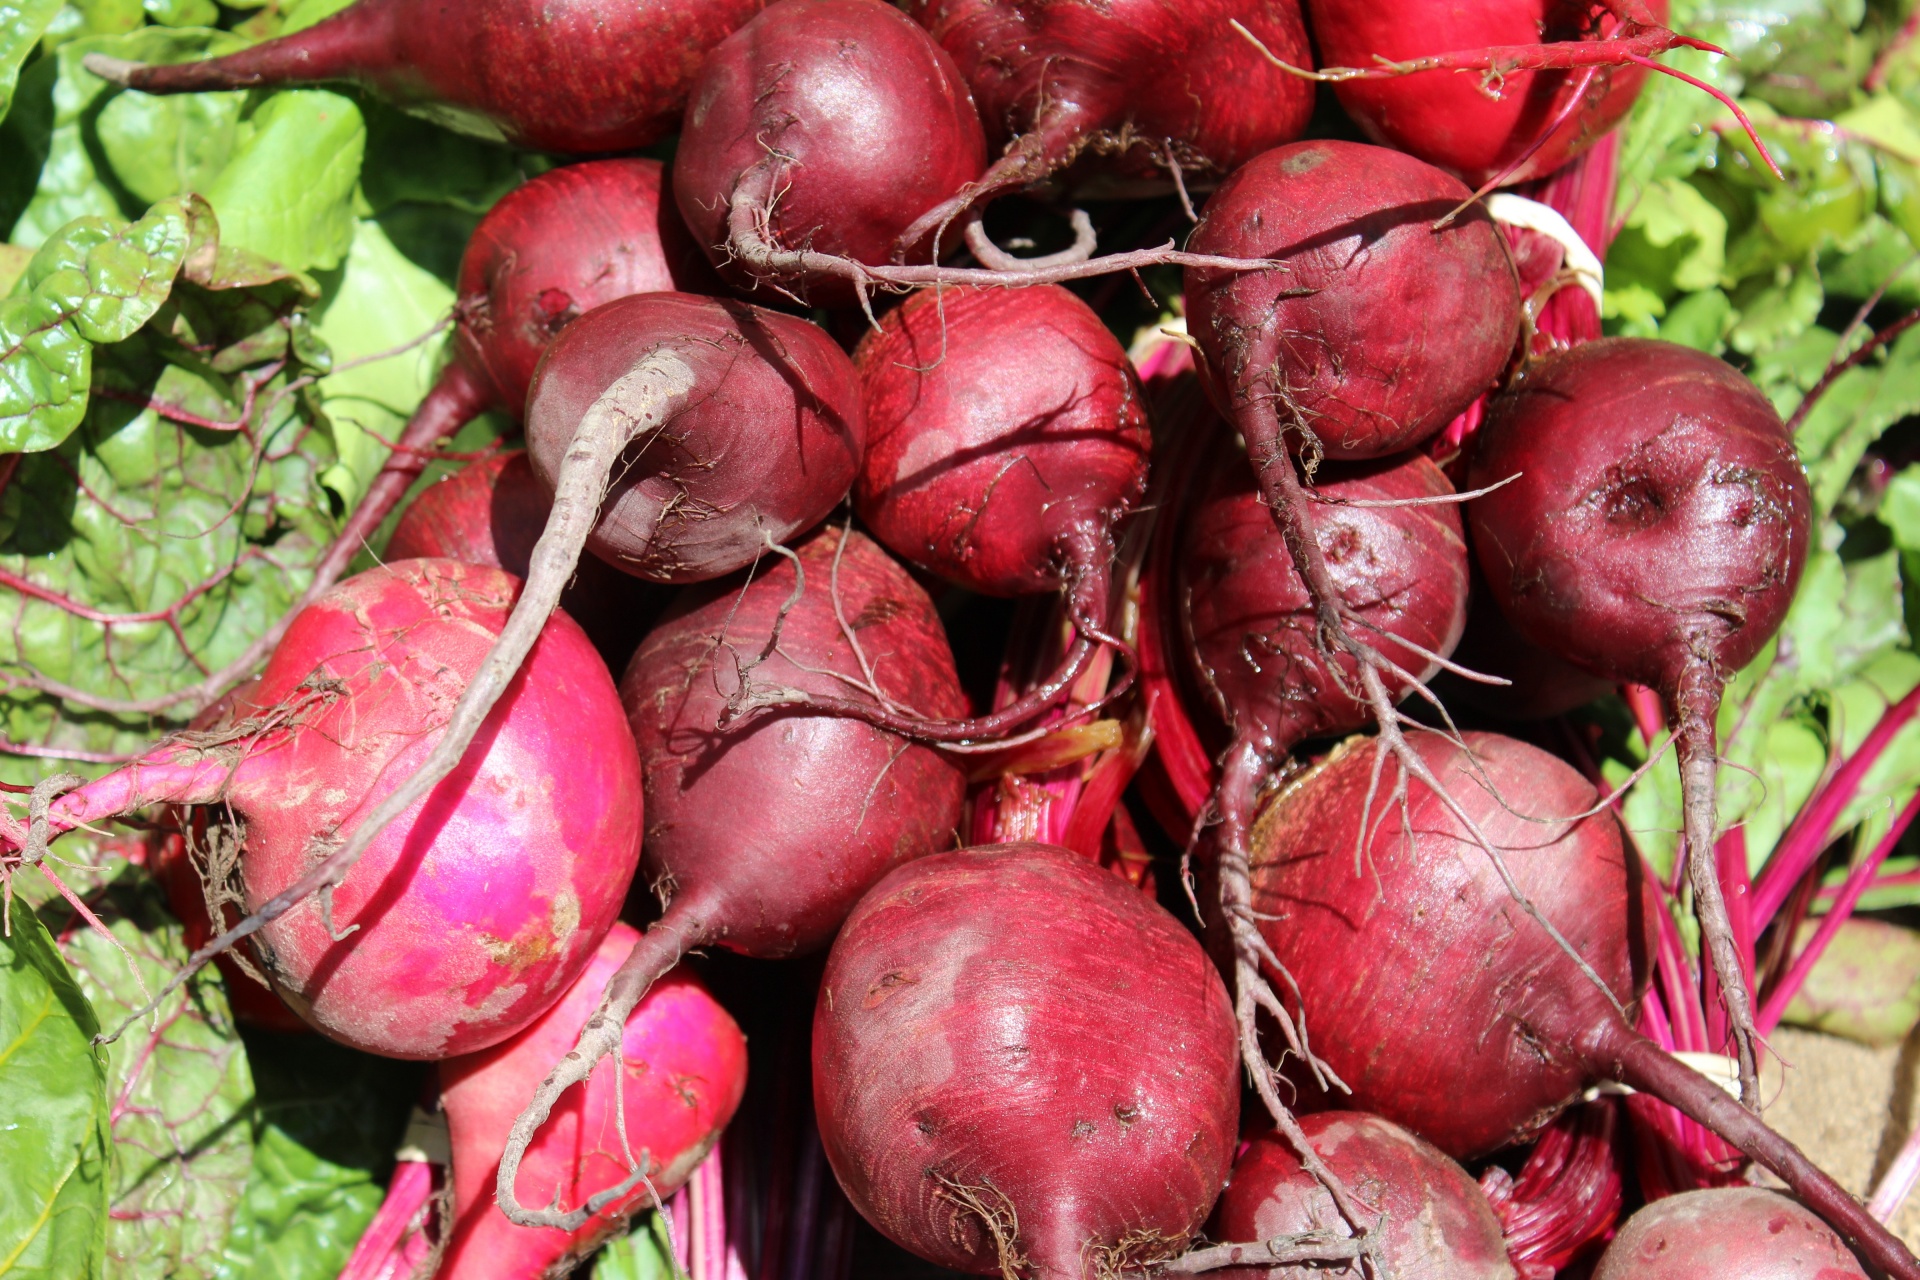 Imagd of Beets